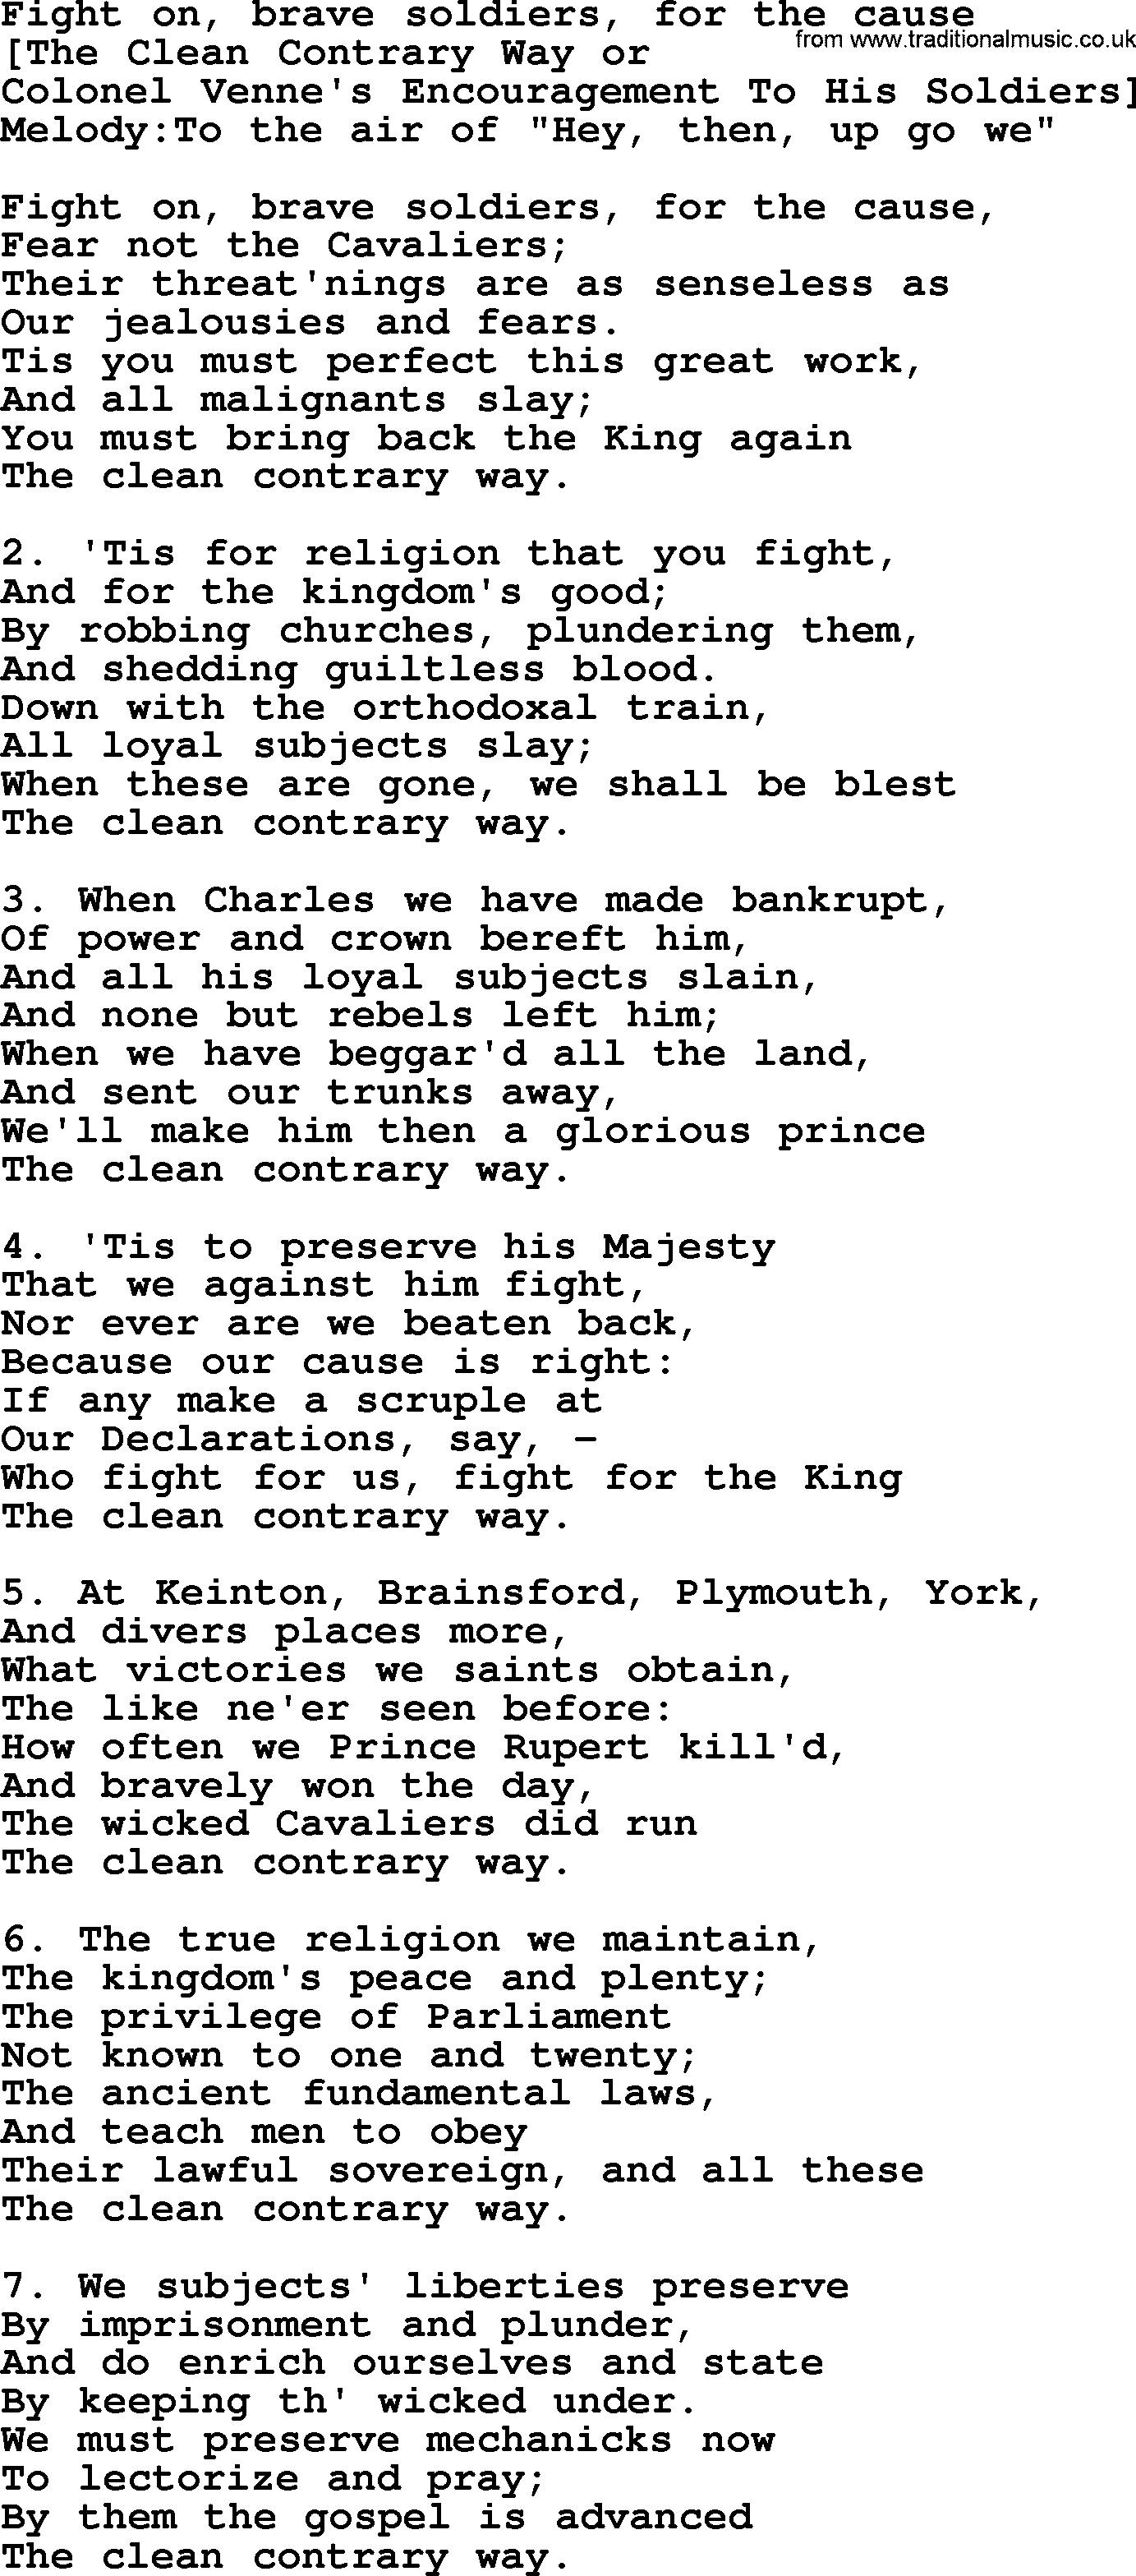 Old English Song: Fight On, Brave Soldiers, For The Cause lyrics